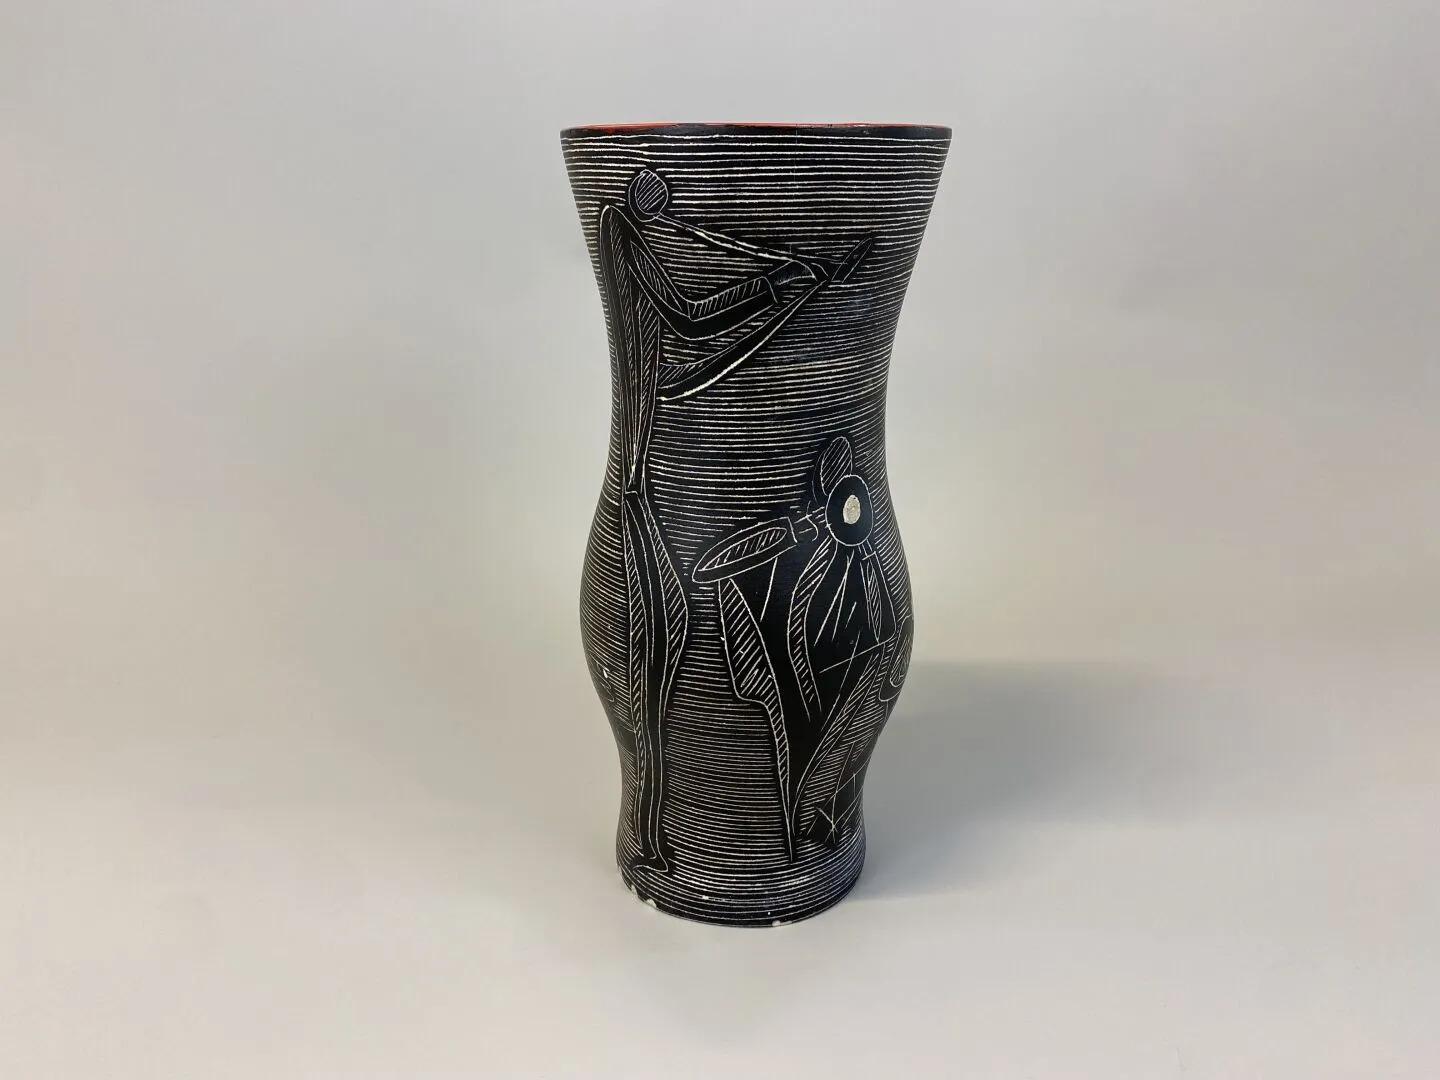 rare Ceramic Vase  by Jean De Lespinasse, France, 1960s

The ceramics workshop, located in the Cimiez district of Nice, employs about ten people (casting of pieces, tinkering, baking of biscuits, decoration, enamelling, baking, etc.). The raw